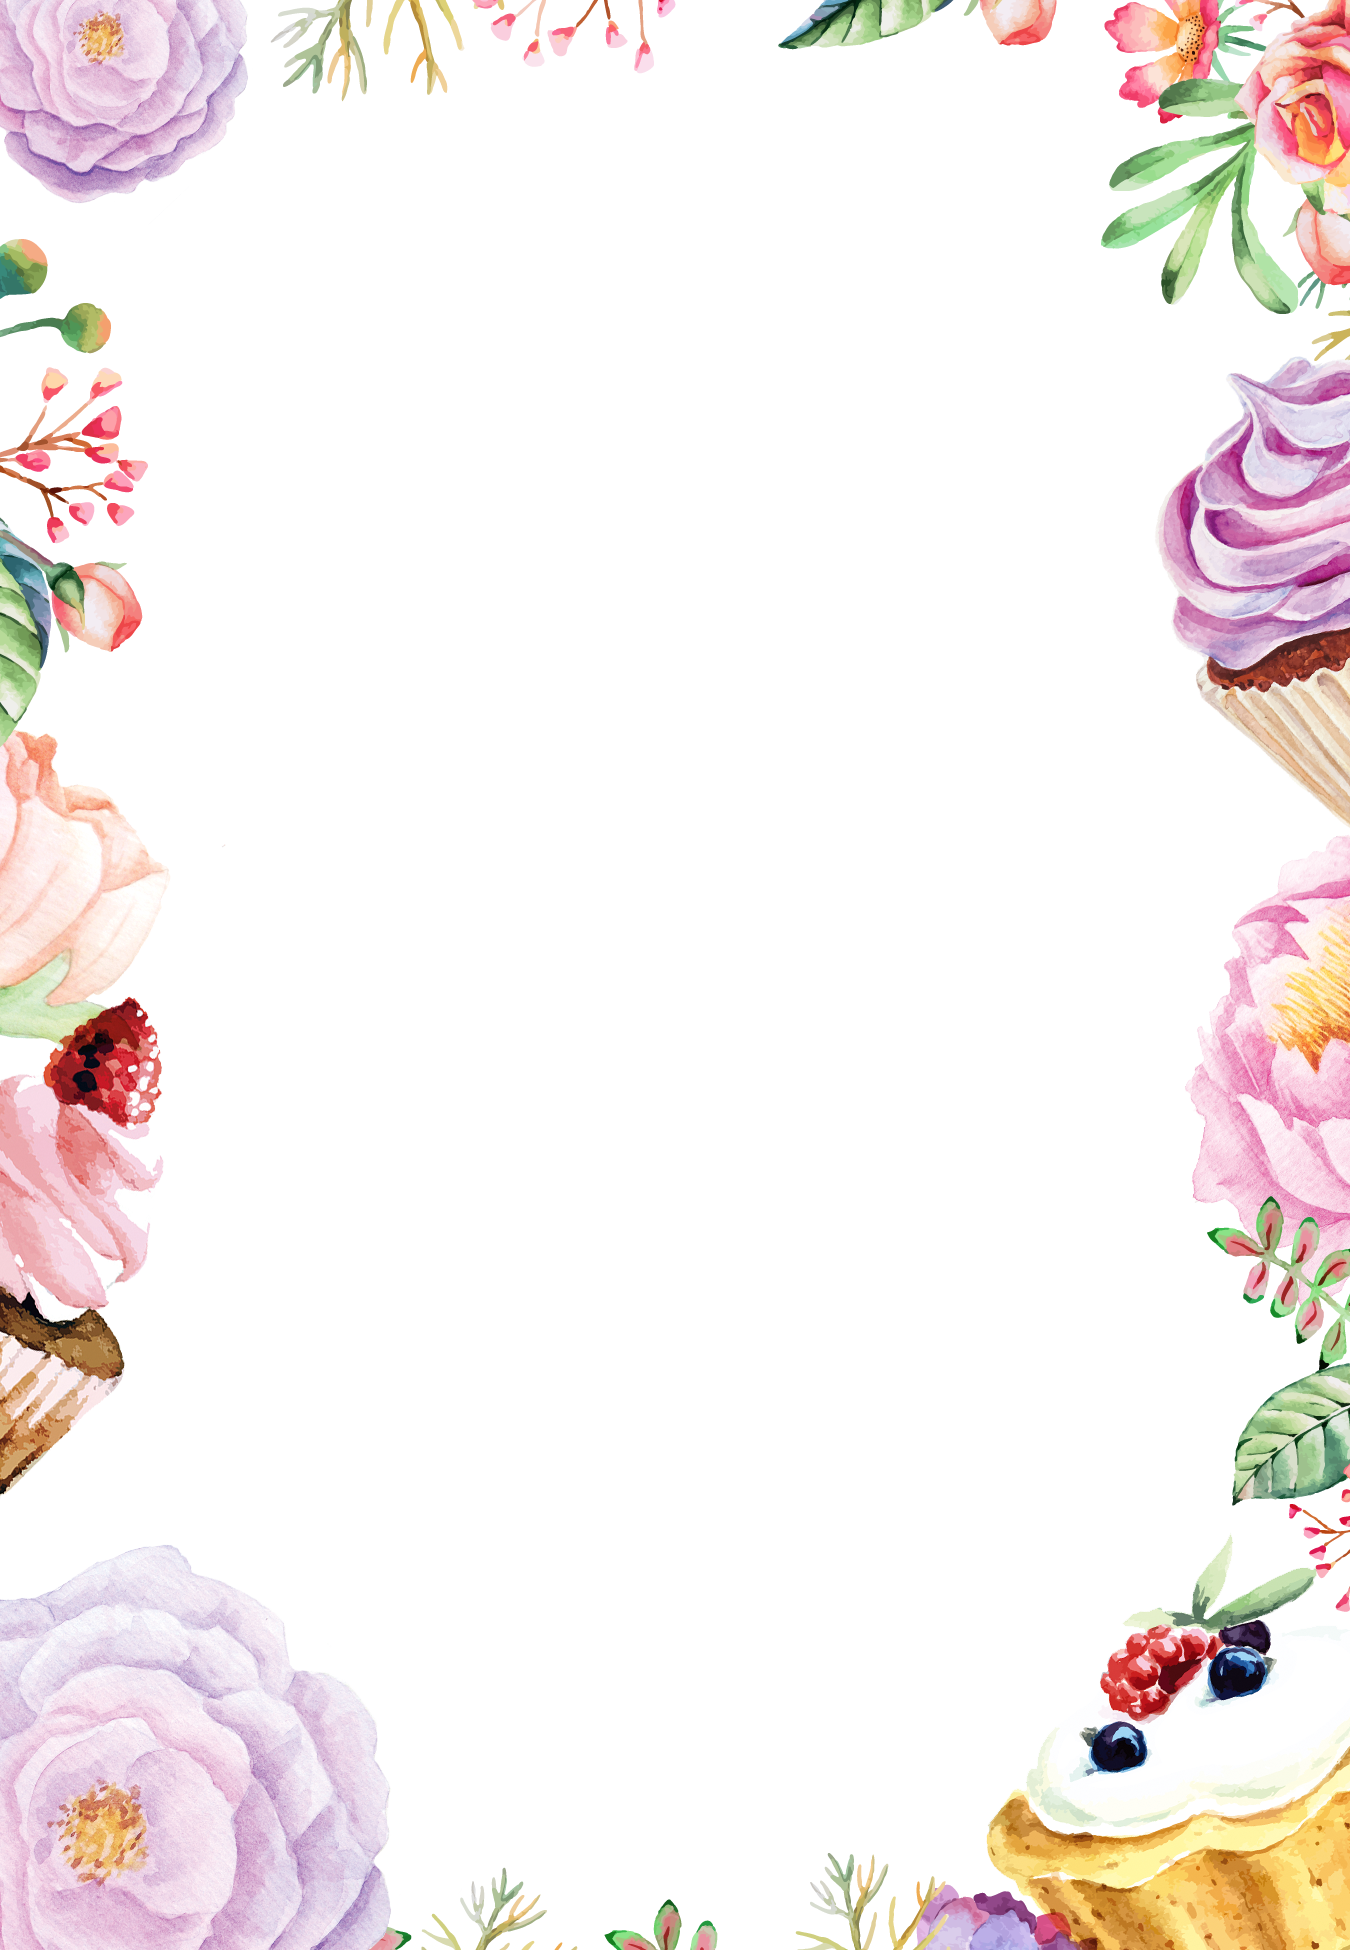 Flower Painting Watercolor Cake Flowers Border Drawing PNG Image